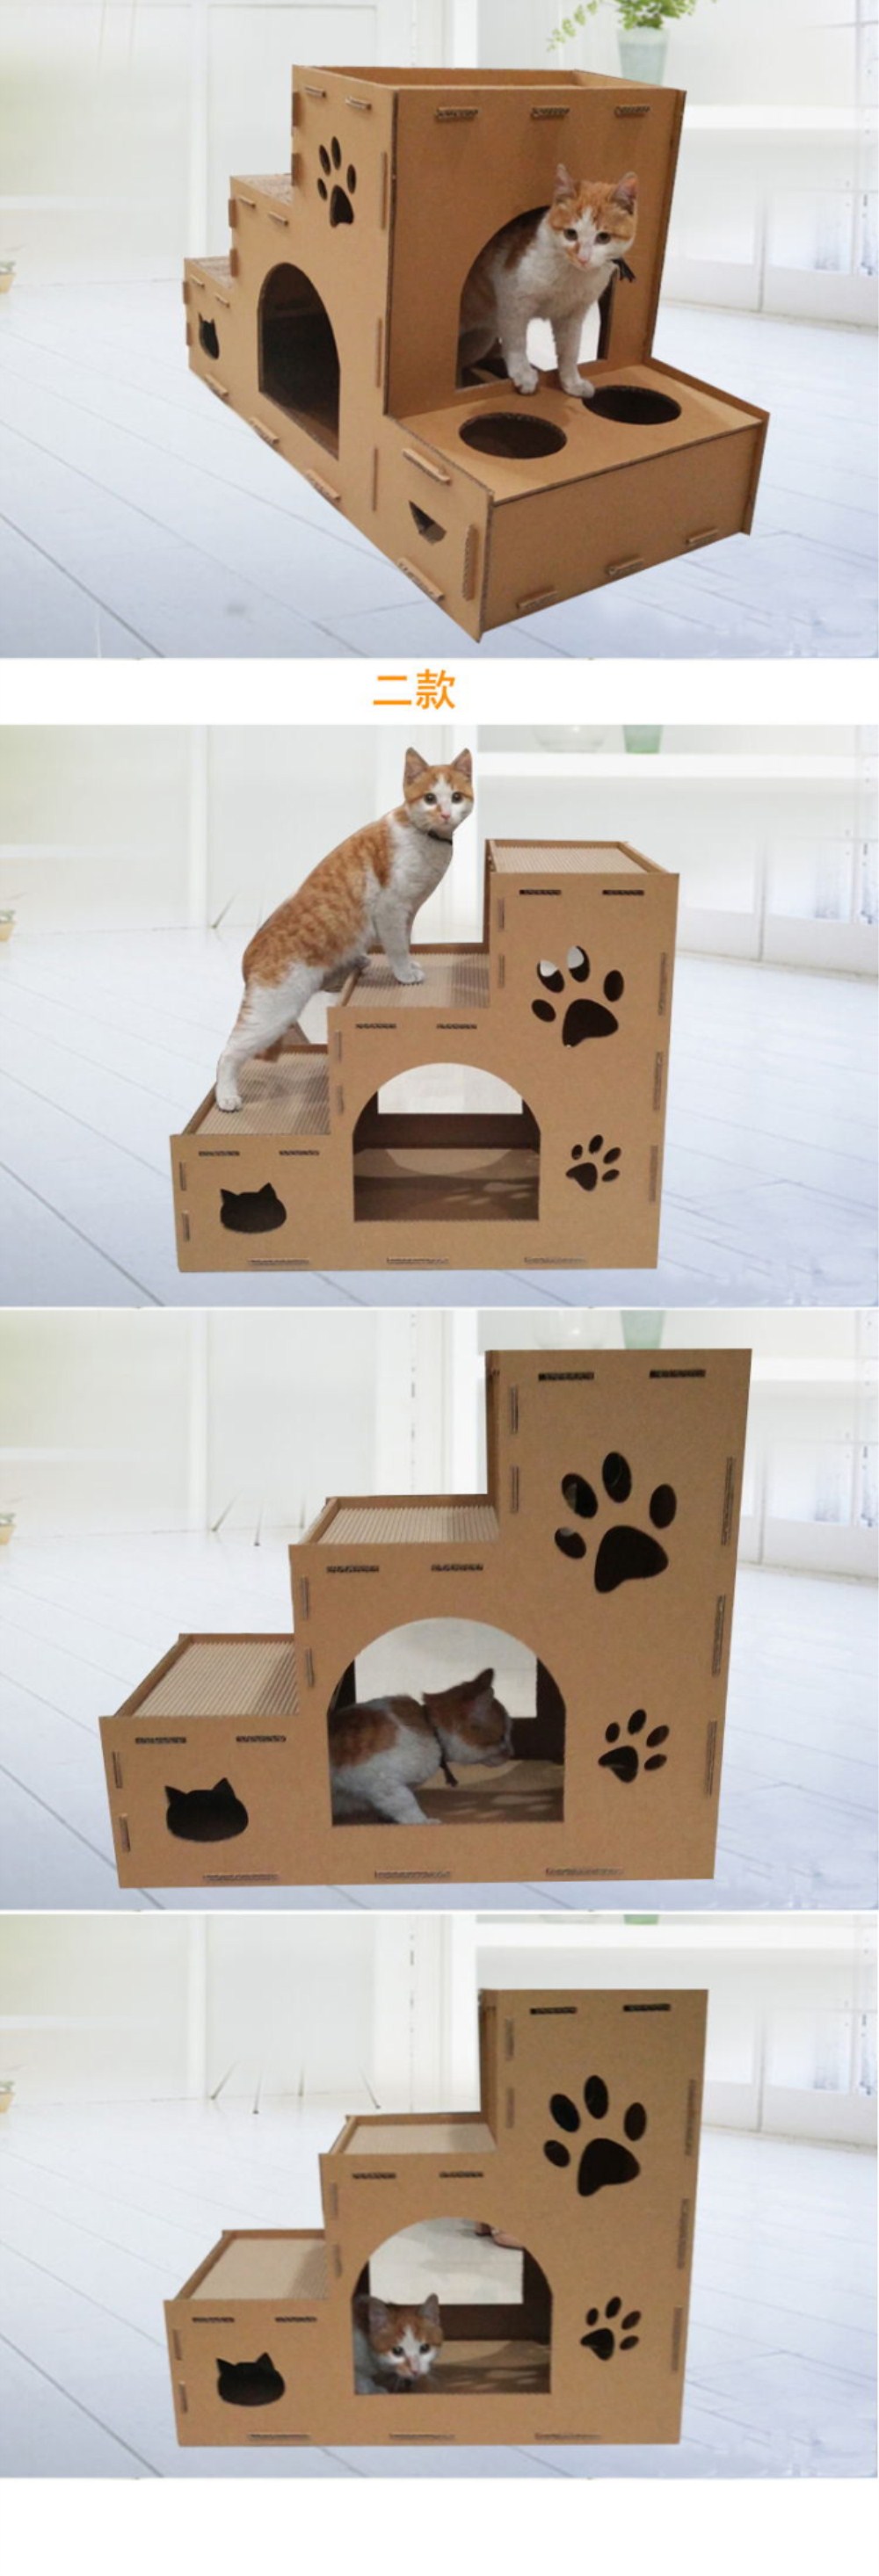 Cardboard Two-story Cat House